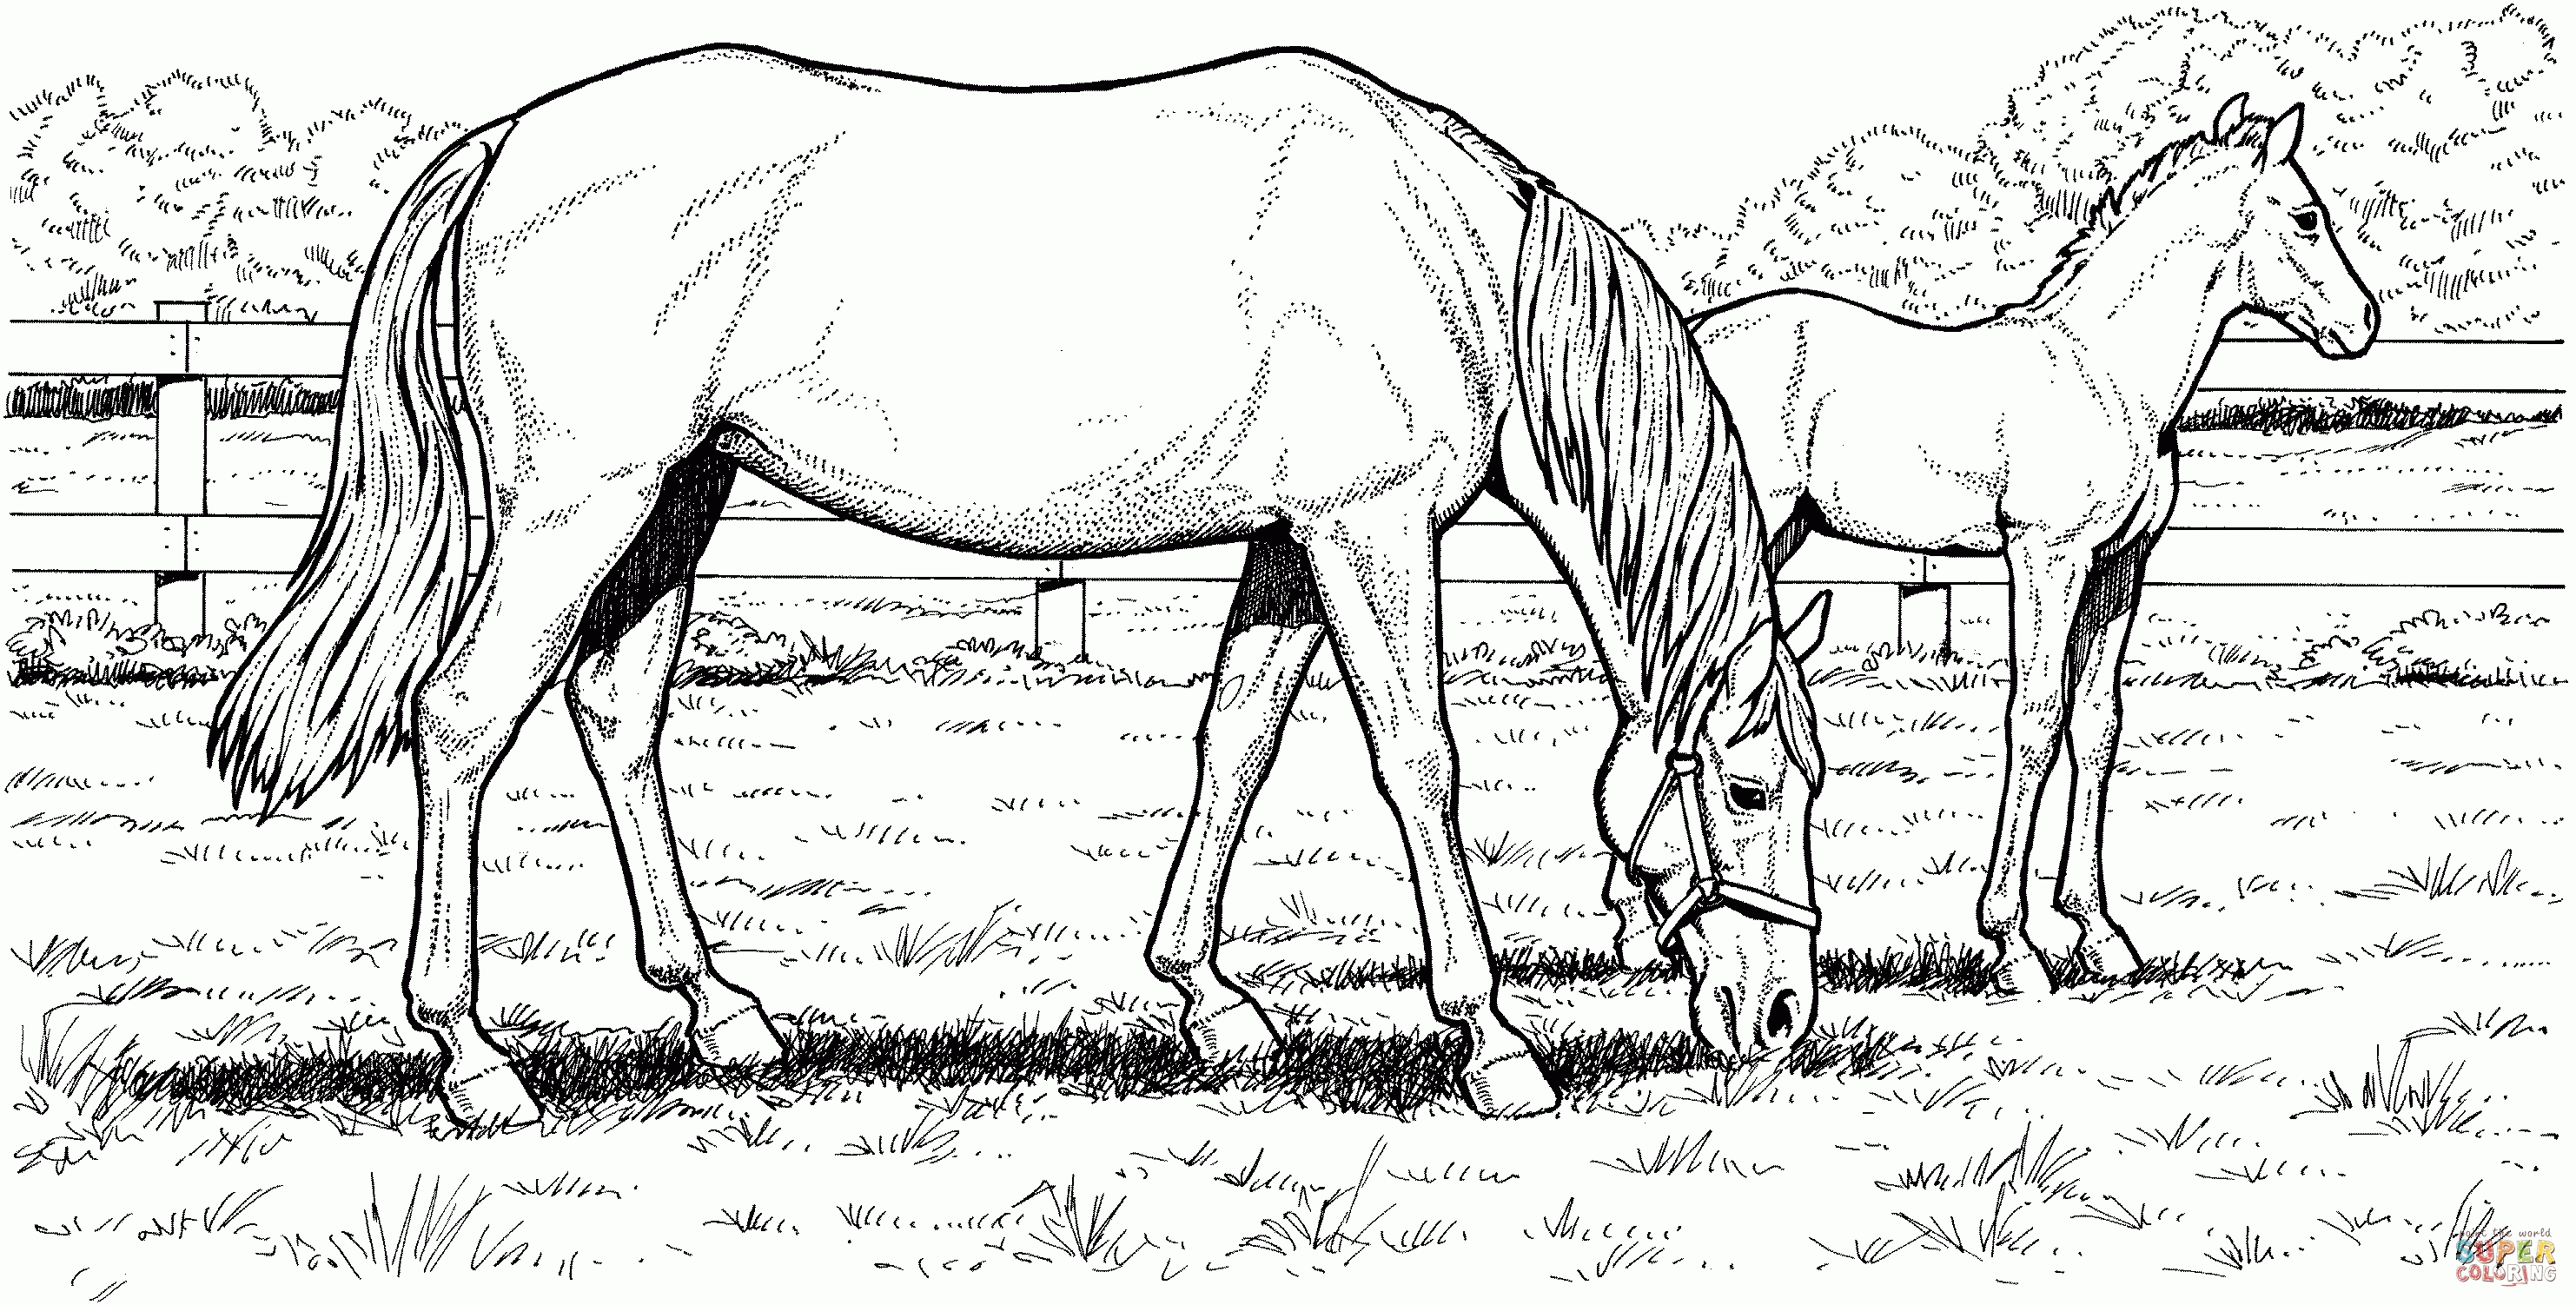 Download Free Printable Horse Coloring Pages For Adults - Coloring Home